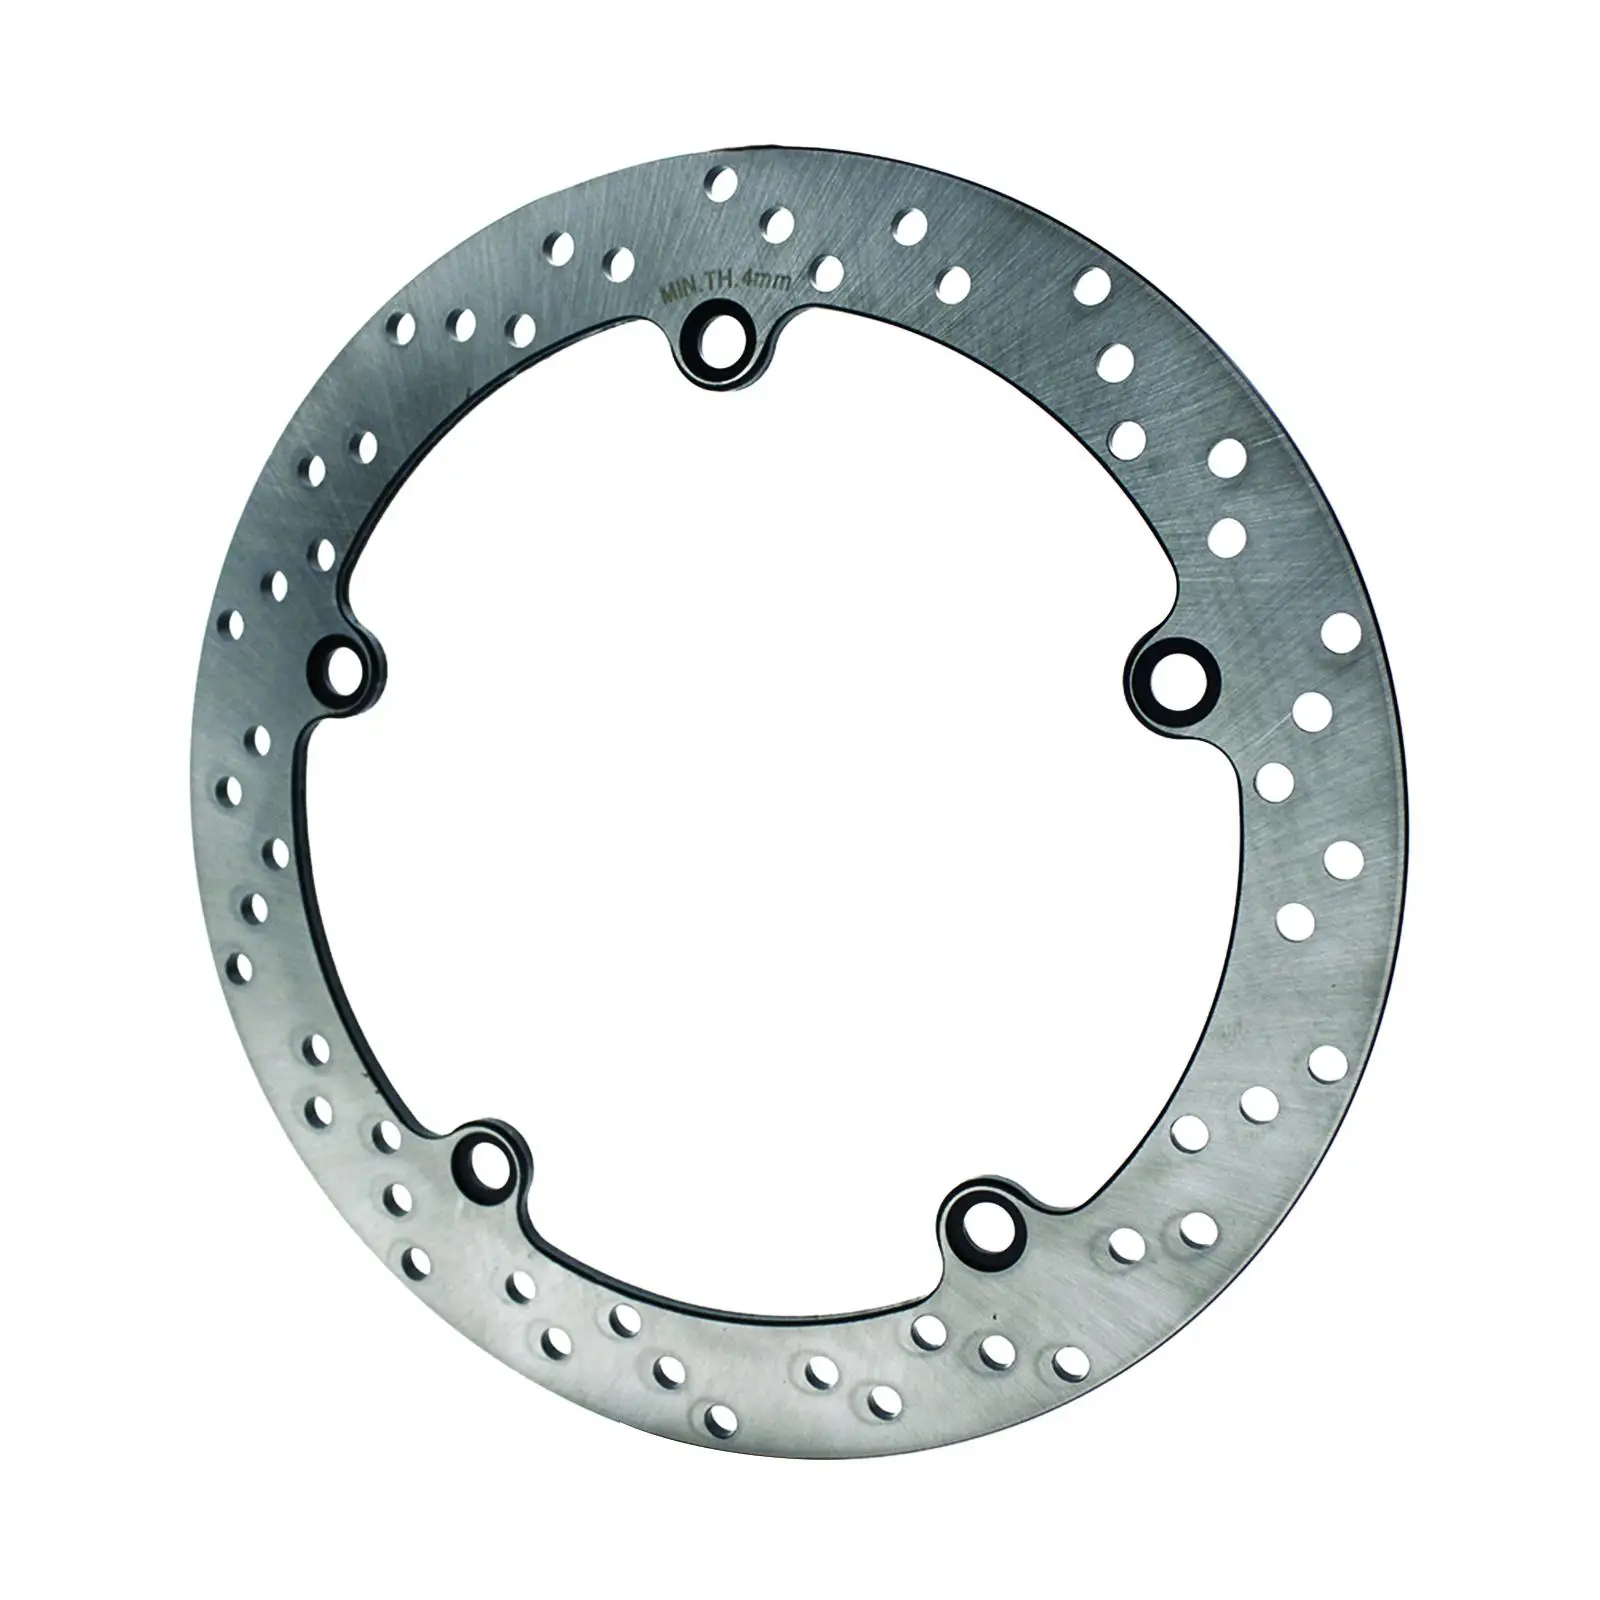 Motorcycle Rear Brake Disc for BMW R1100GS R1100R Professional Direct Replaces Easy to Install